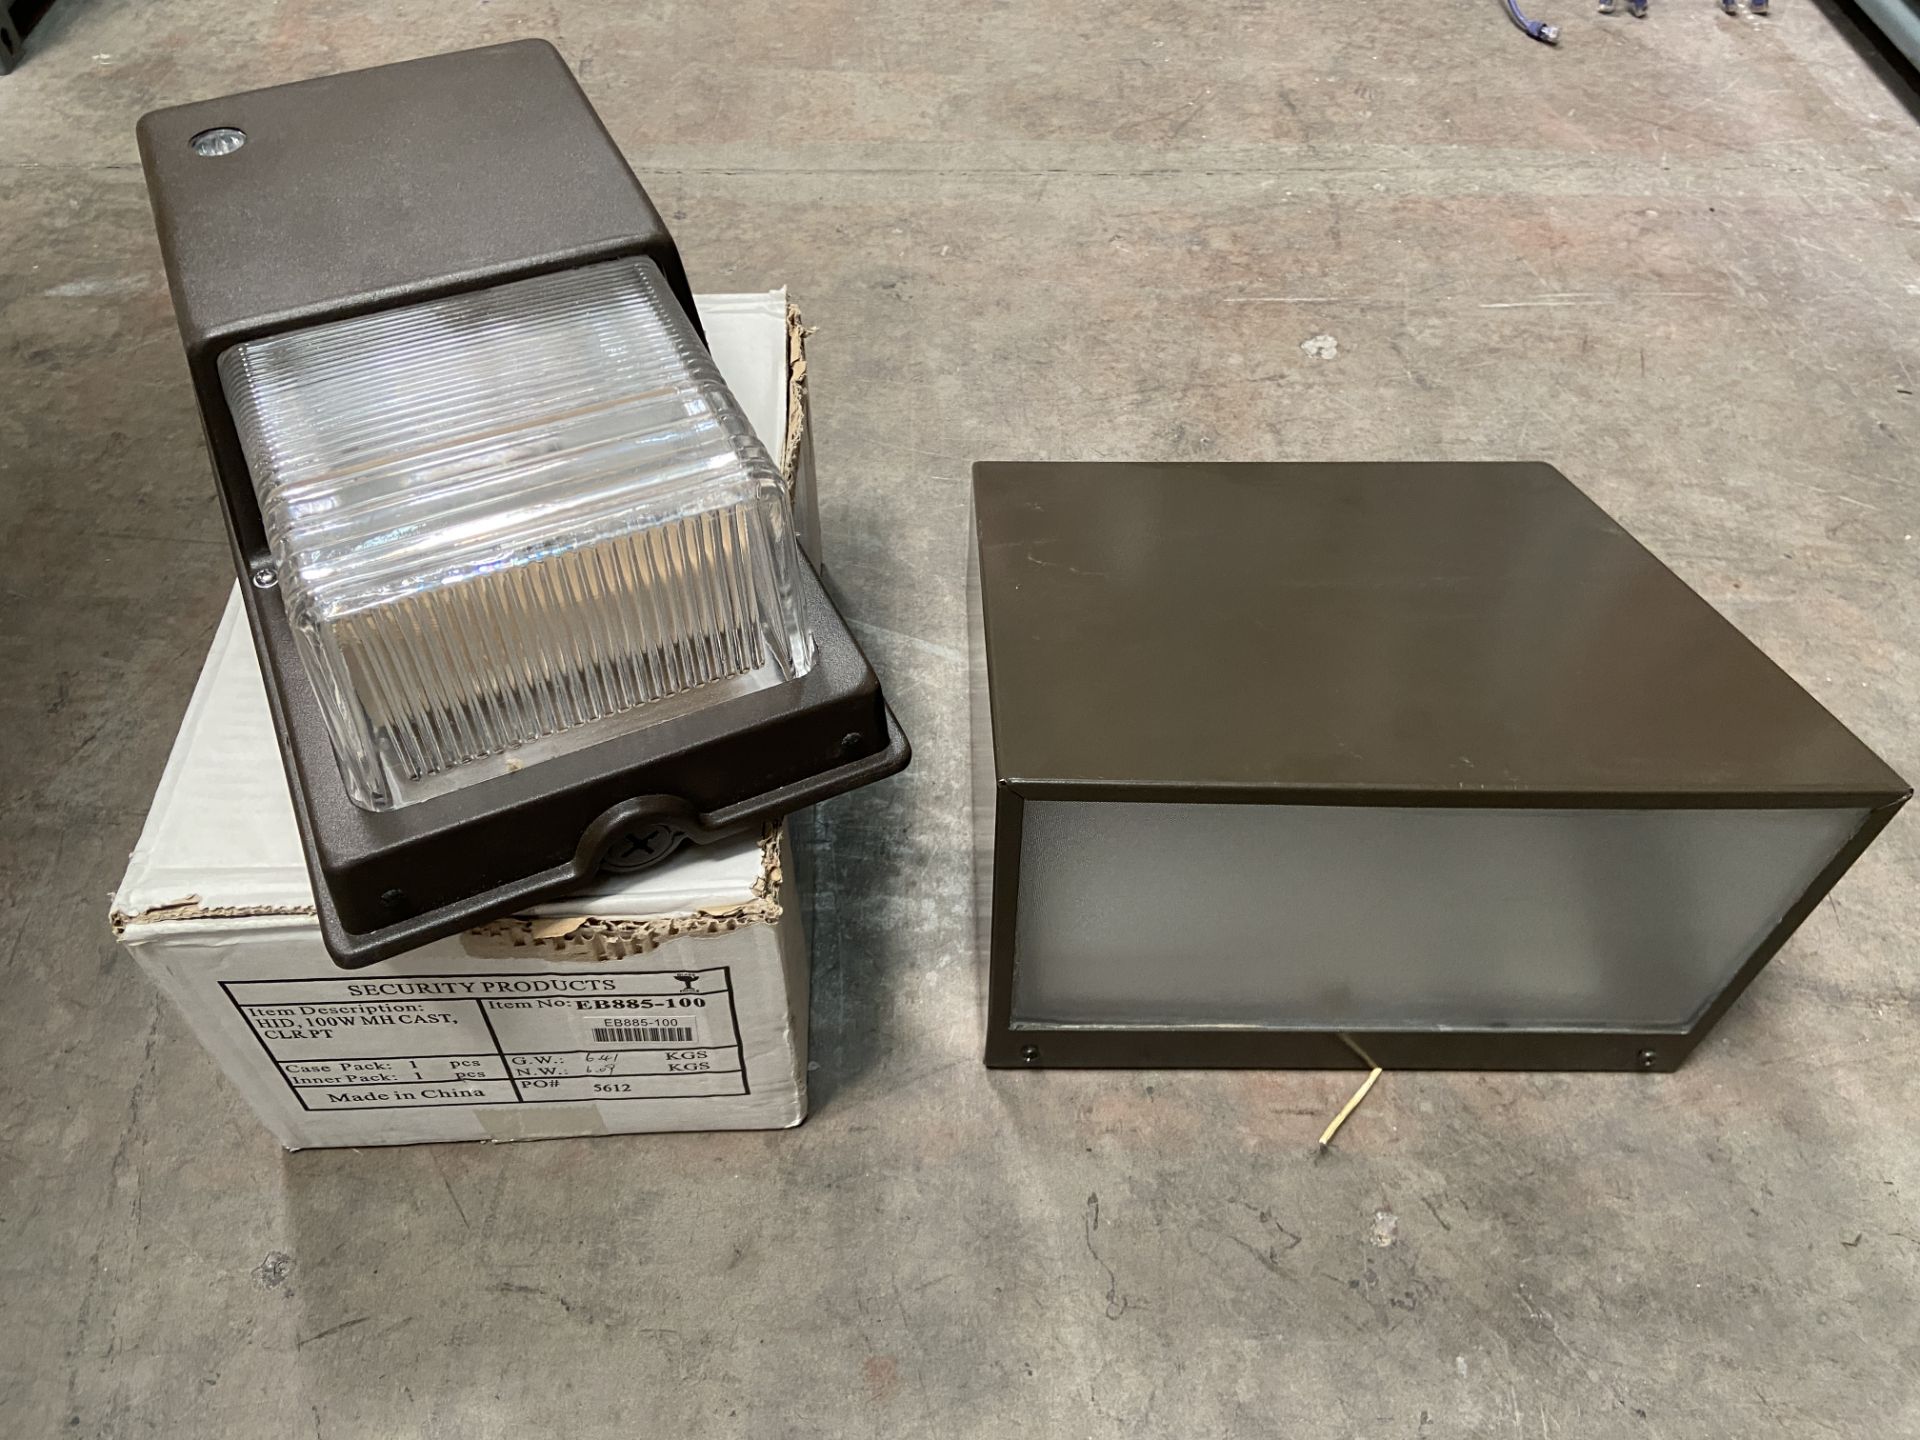 2 New Commercial Industrial Light Fixtures - Image 2 of 5